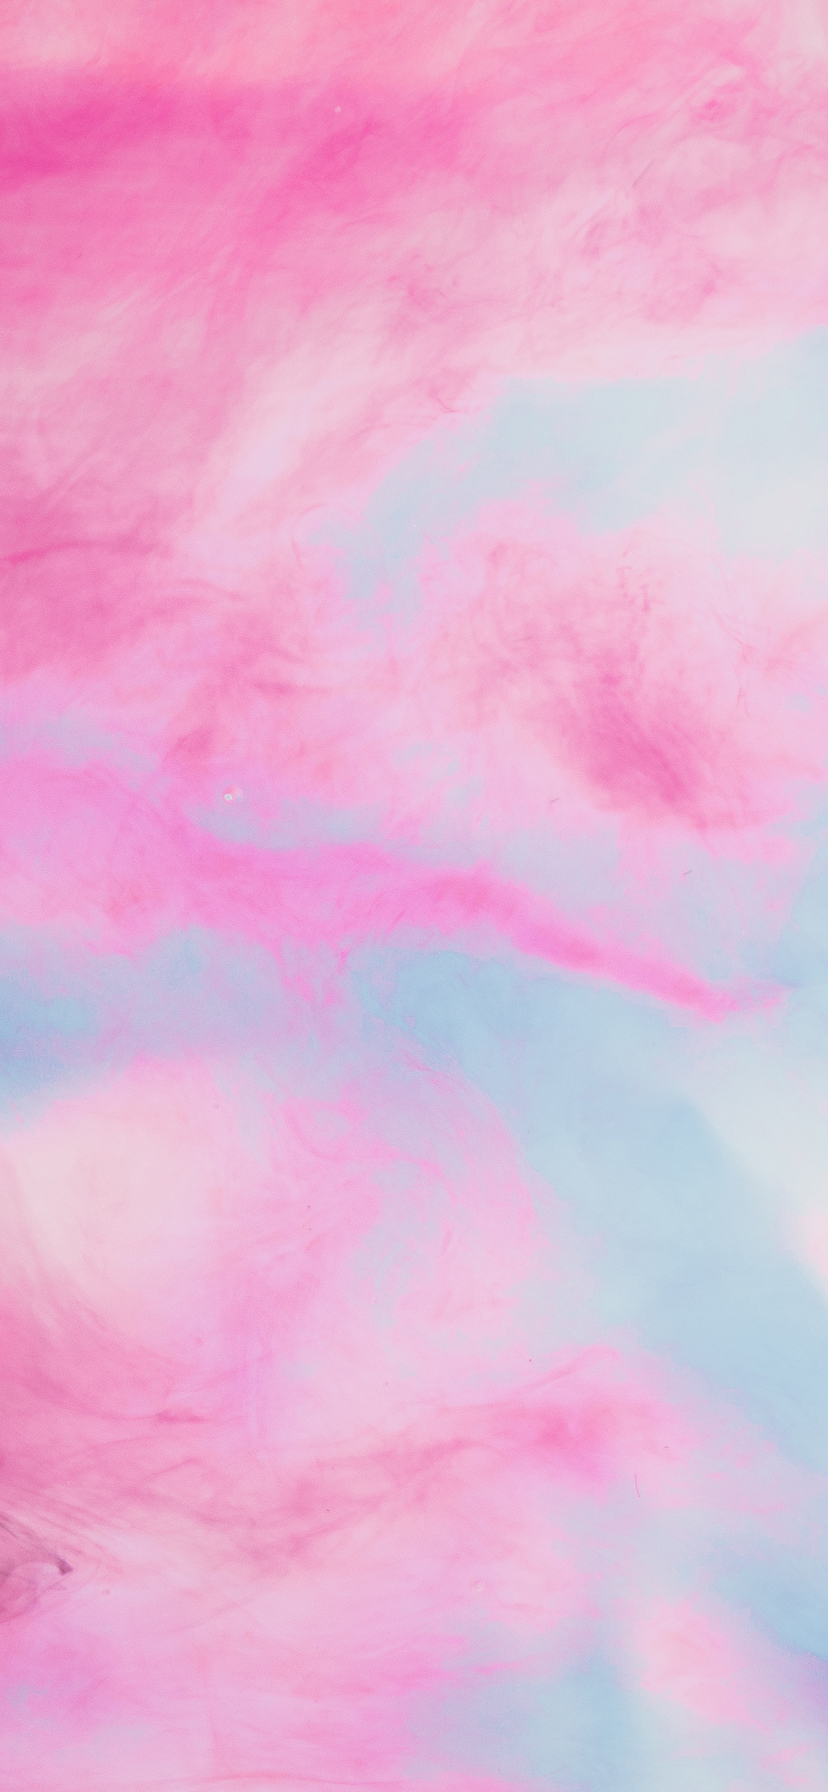 Free iPhone 11 Wallpaper Download 08 of 20 - Pink and Blue Abstract ...